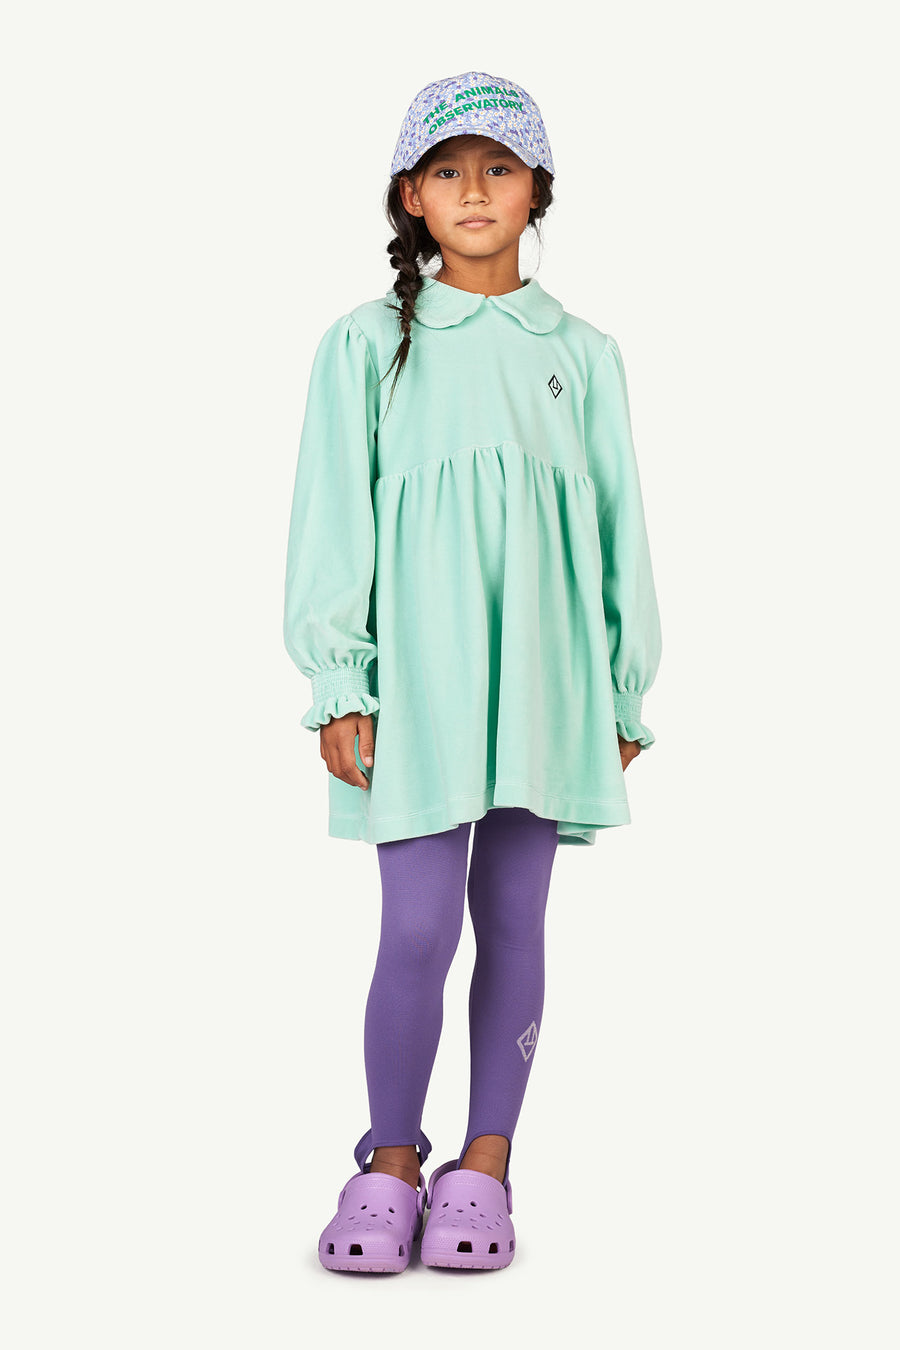 MOUSE KIDS DRESS - TURQUOISE